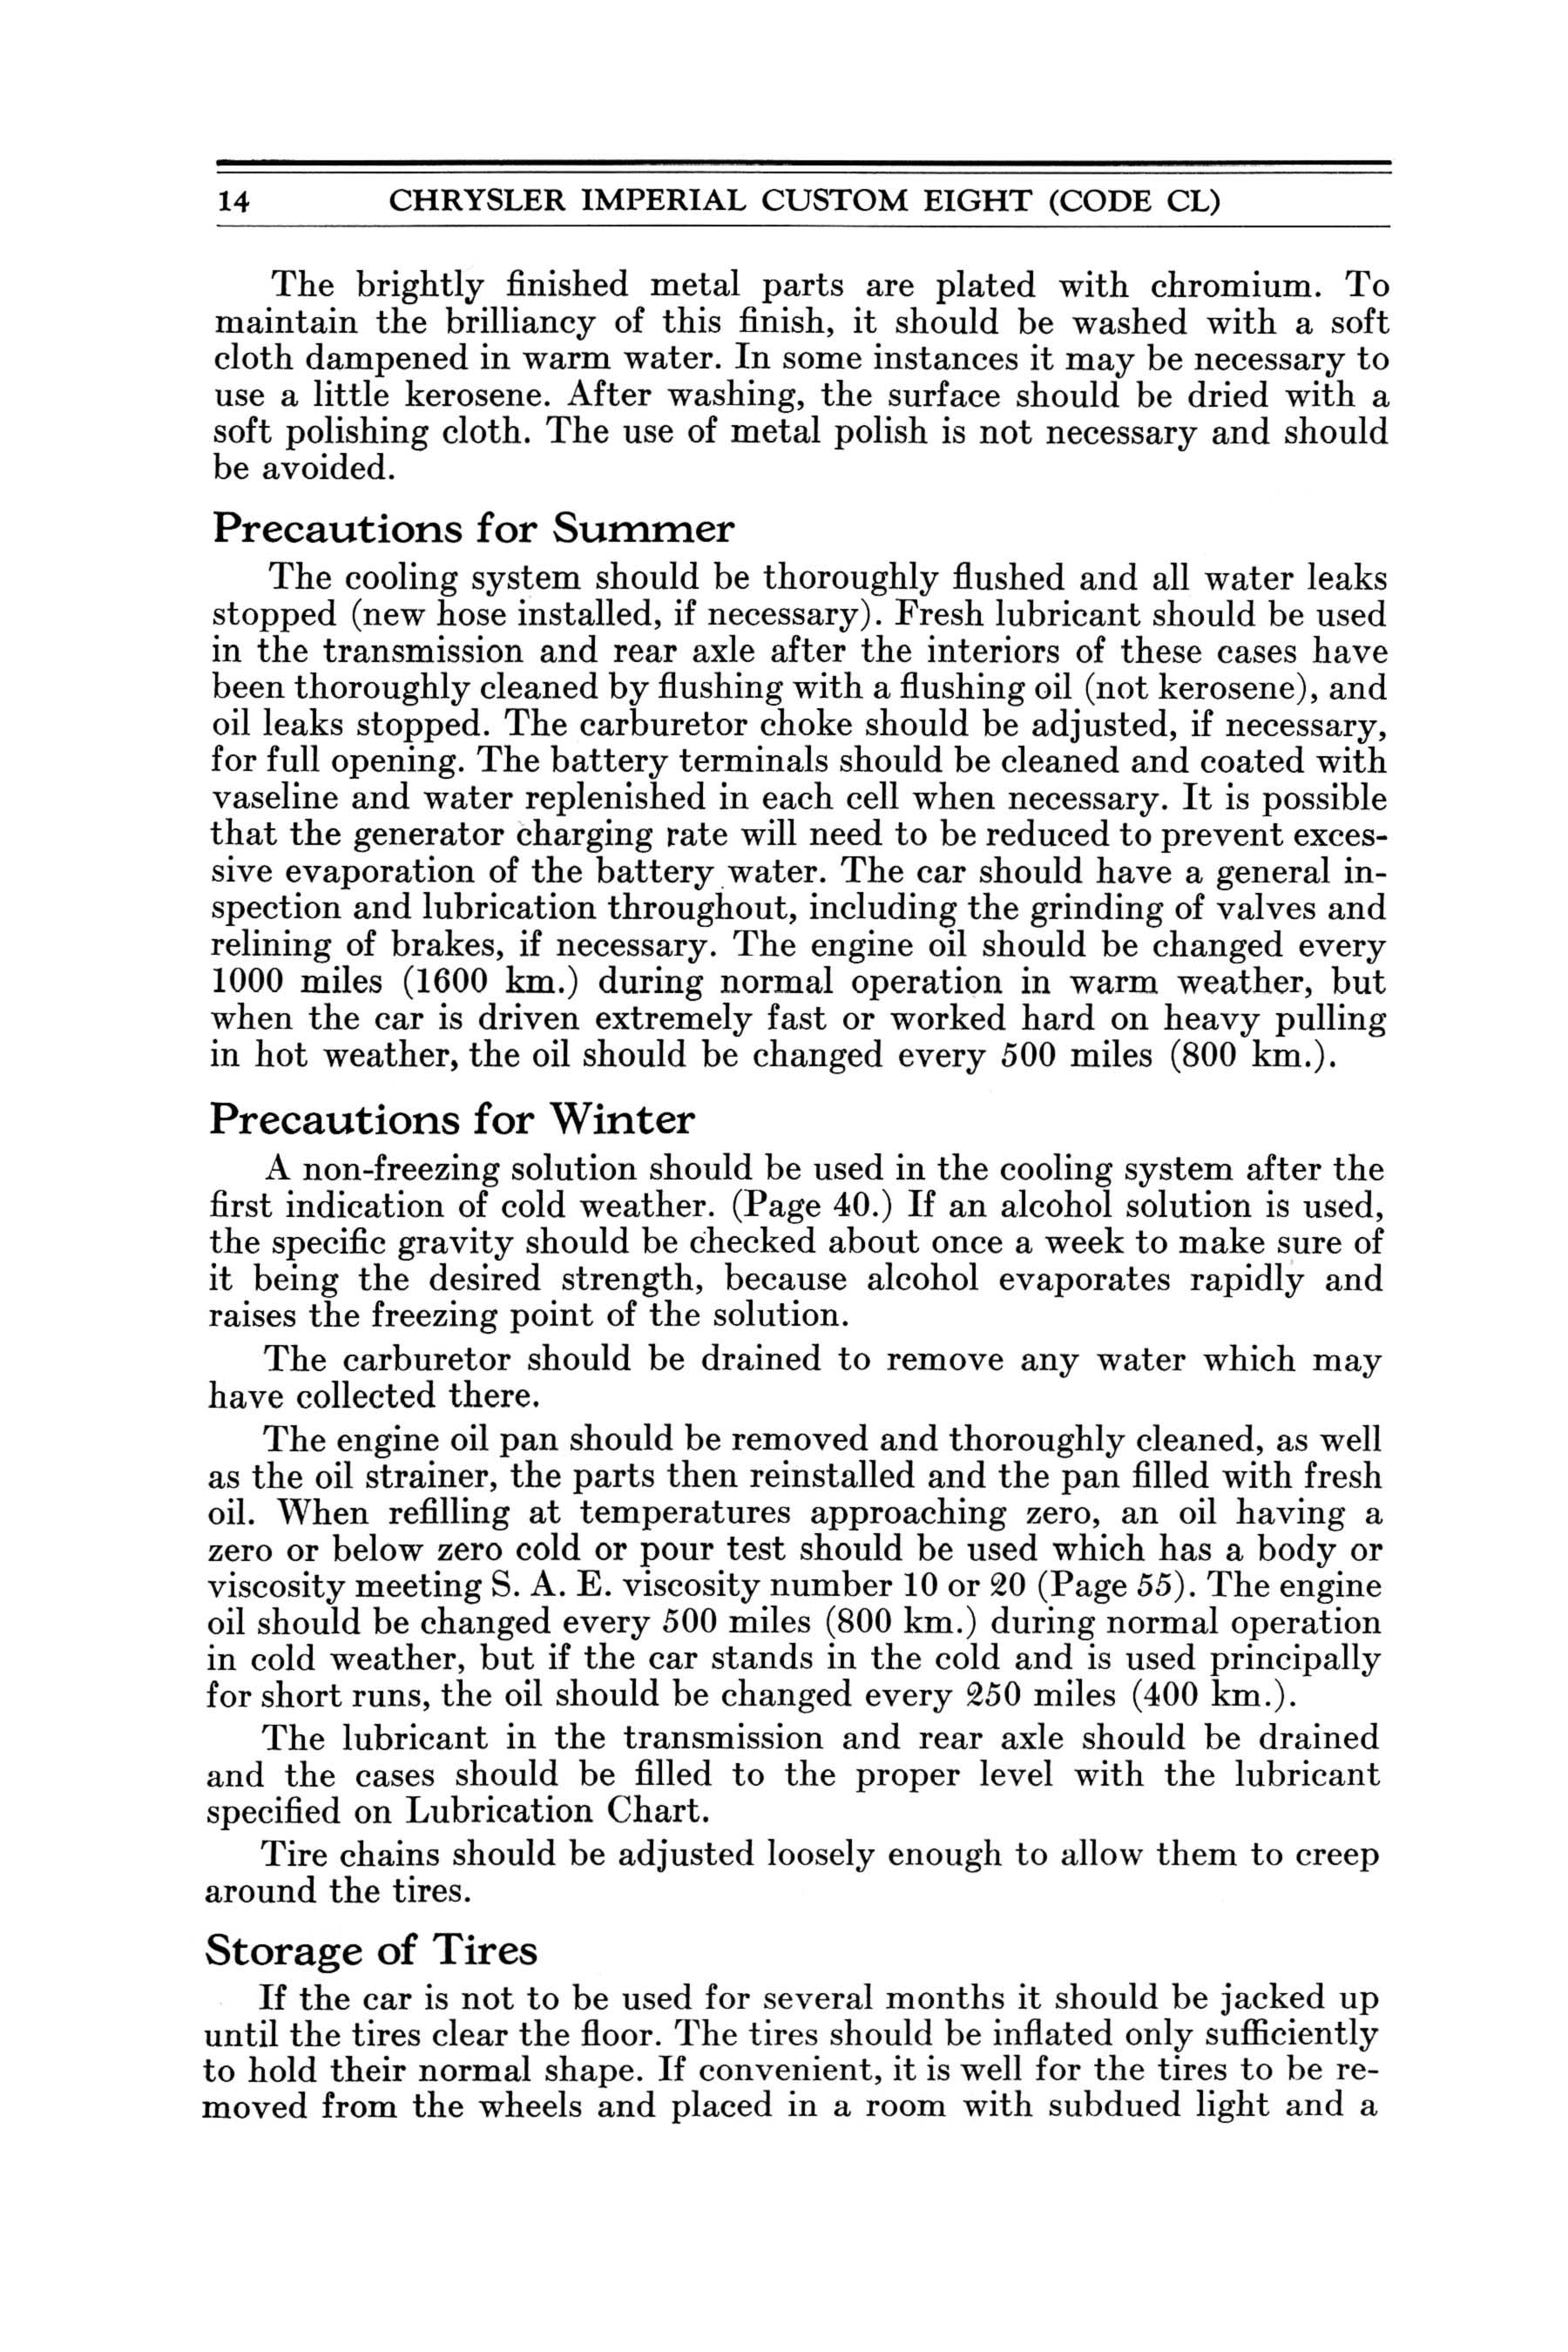 1932 Chrysler Imperial Instruction Book Page 75